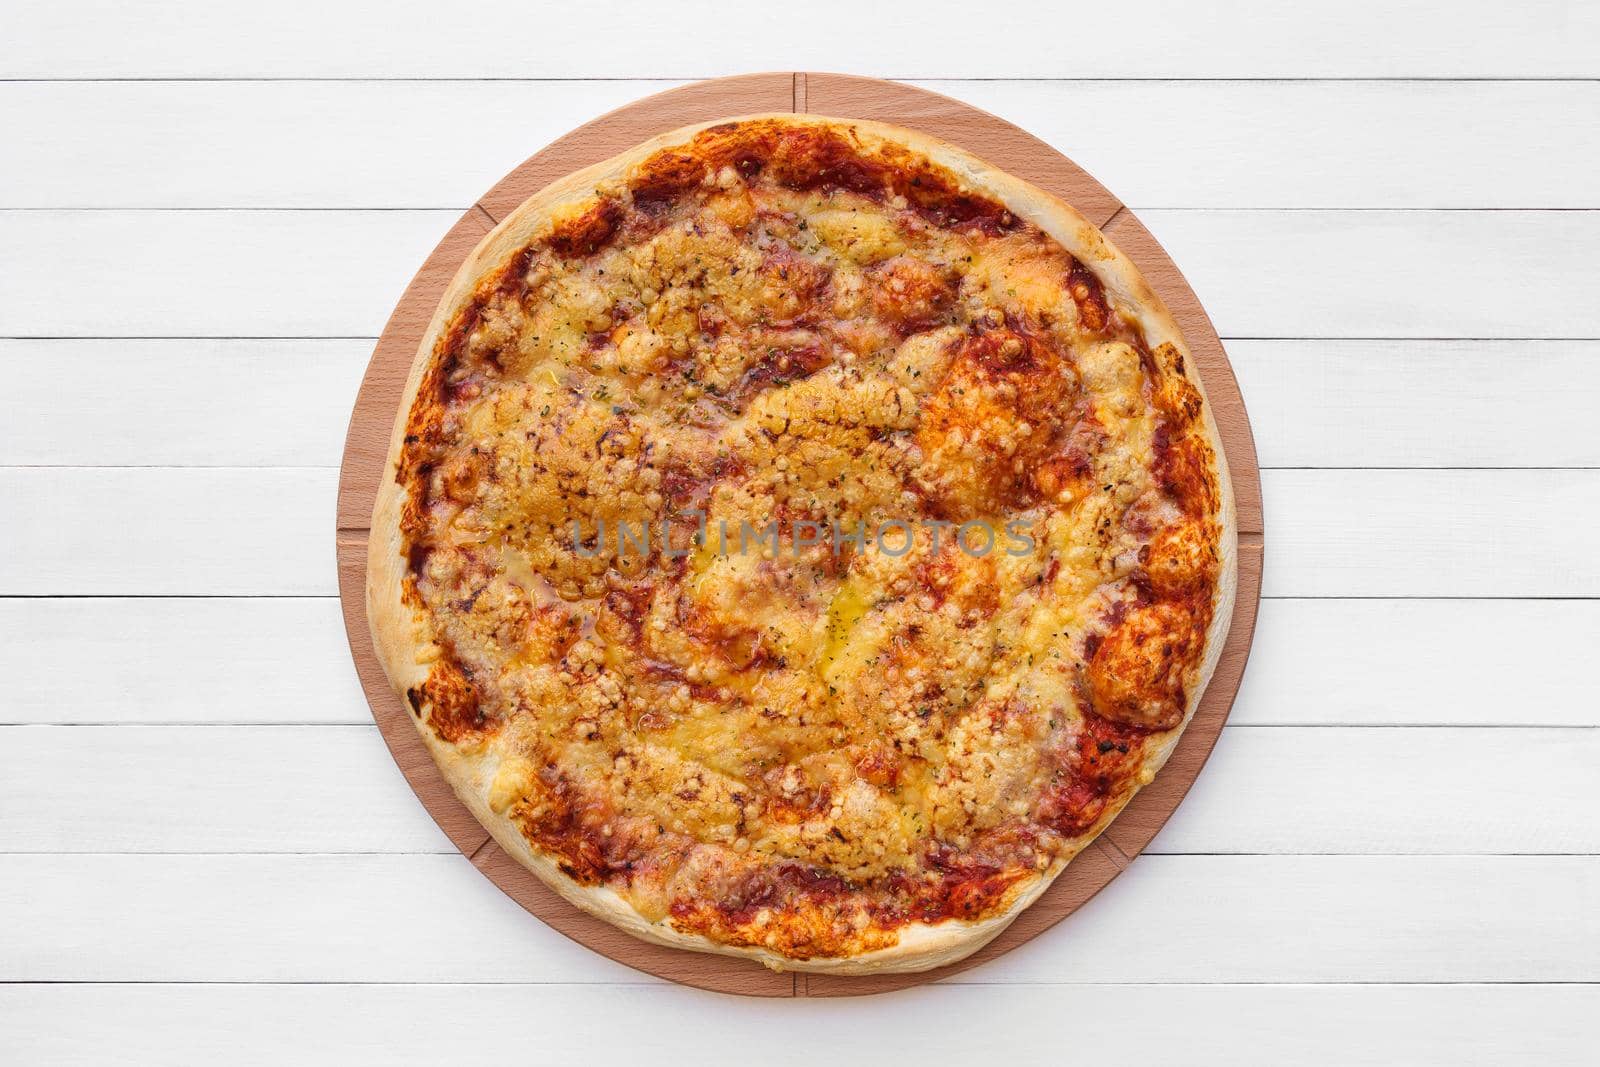 Whole round pizza topped with cheese and oregano on wooden plate. Top view on white board background by apavlin